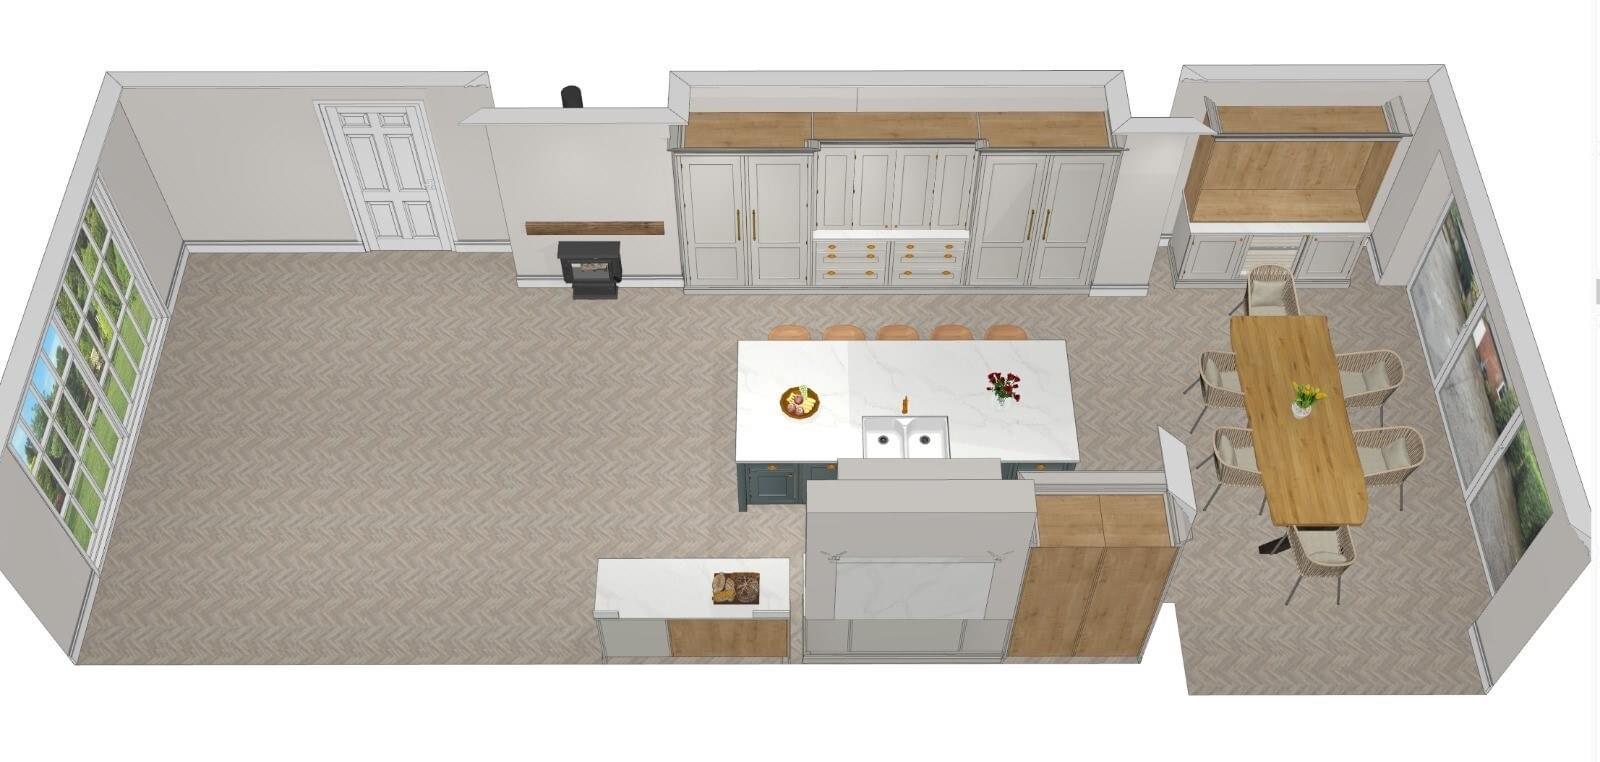 The Spence Home Kitchen plan